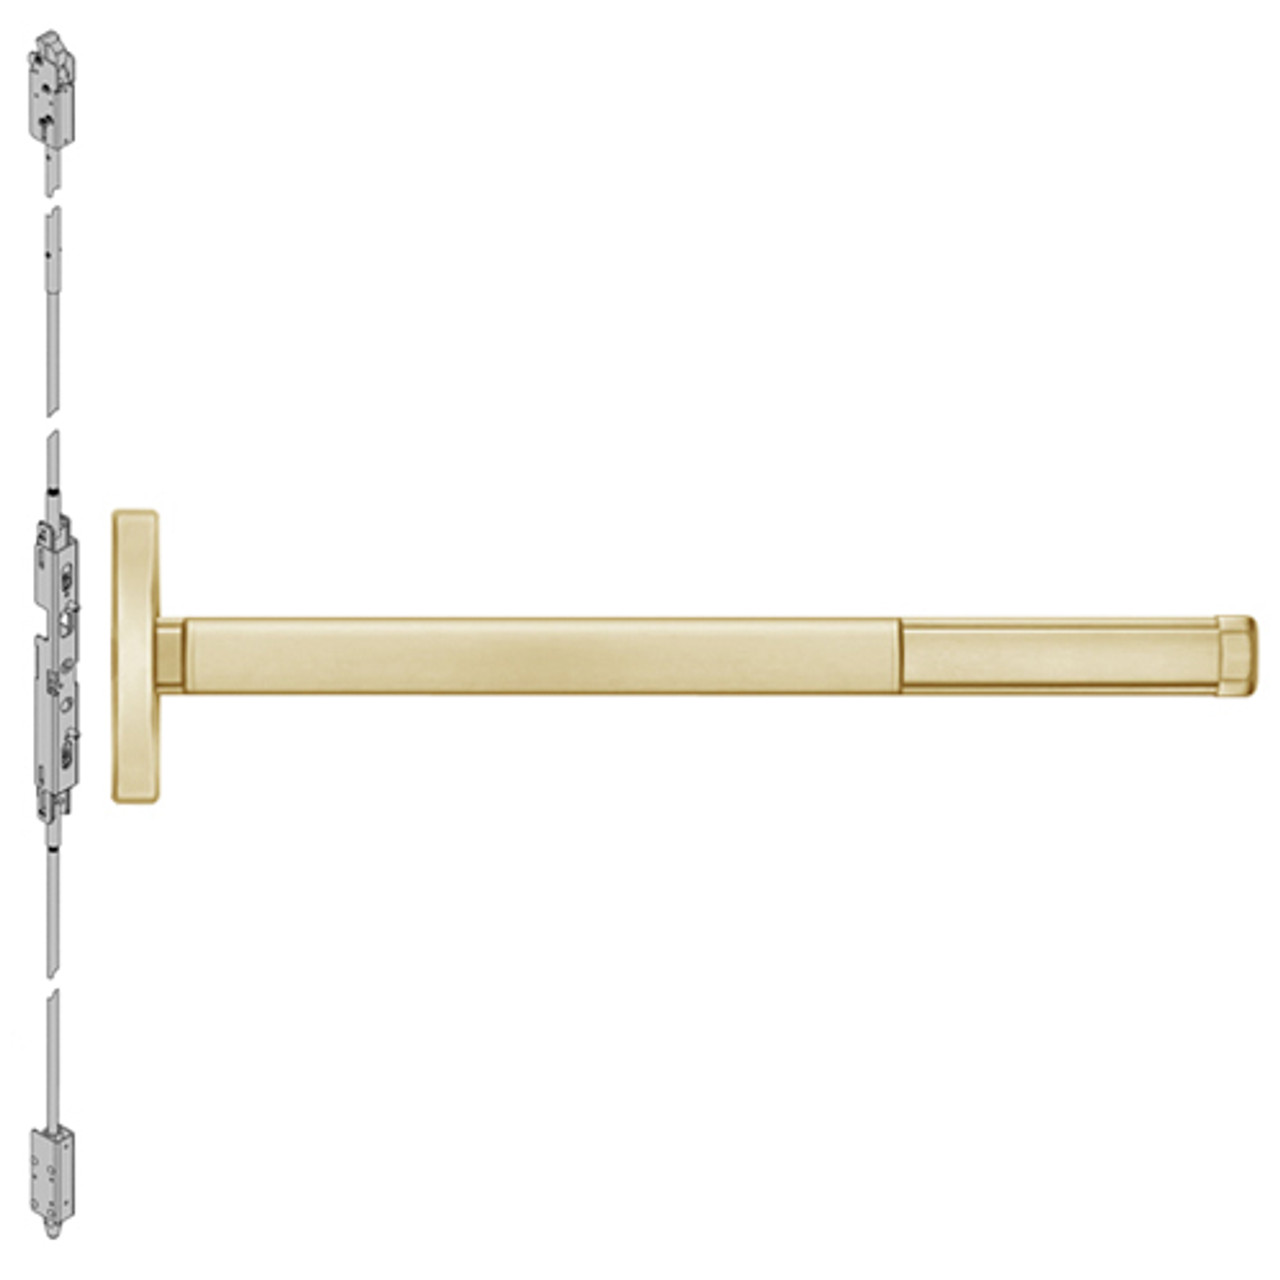 ELR2608-606-36 PHI 2600 Series Concealed Vertical Rod Exit Device with Electric Latch Retraction Prepped for Key Controls Lever in Satin Brass Finish